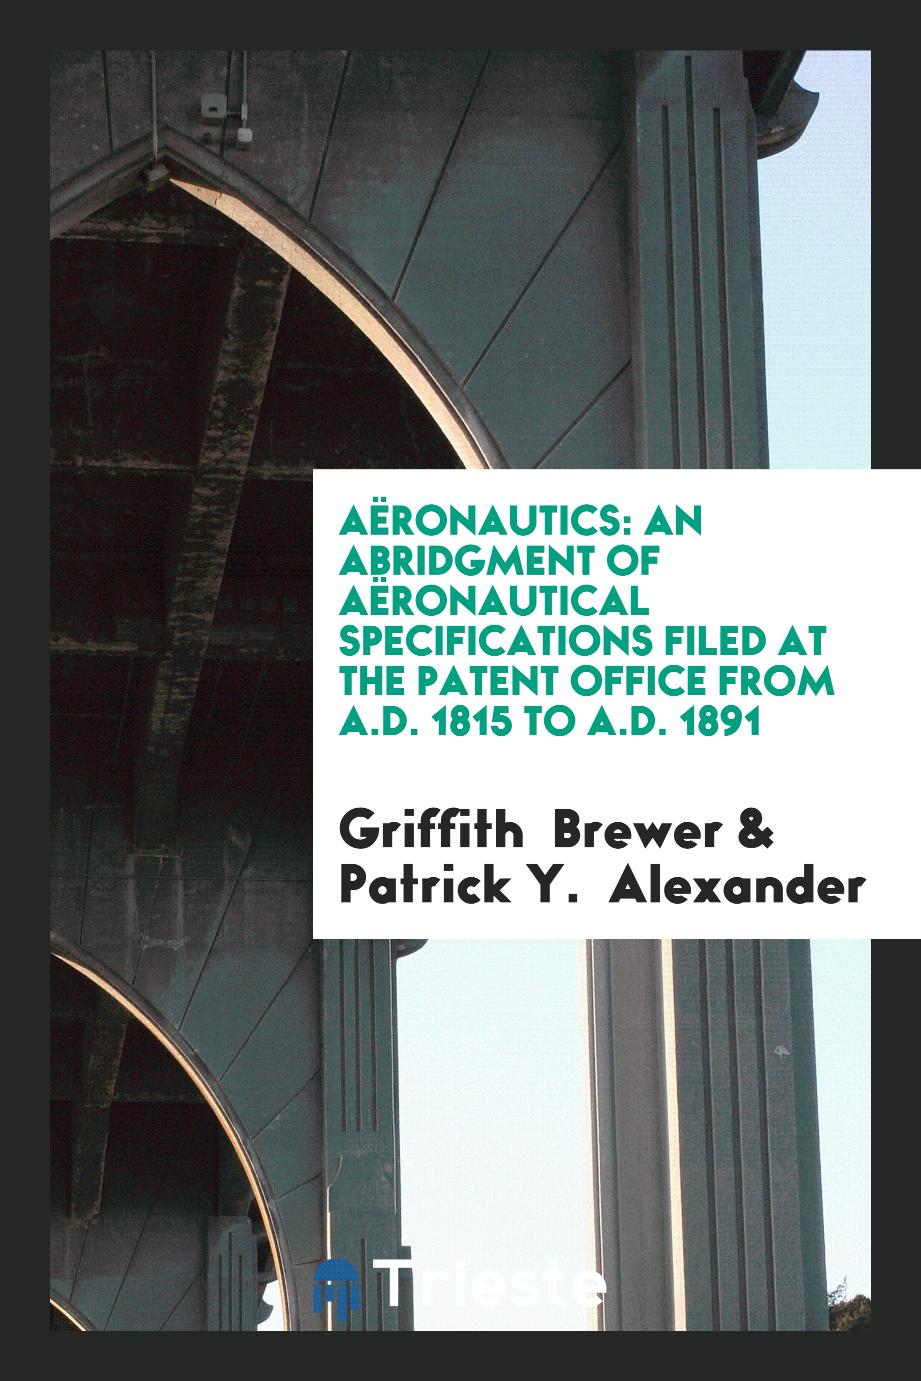 Aëronautics: An Abridgment of Aëronautical Specifications Filed at the Patent Office from A.D. 1815 to A.D. 1891